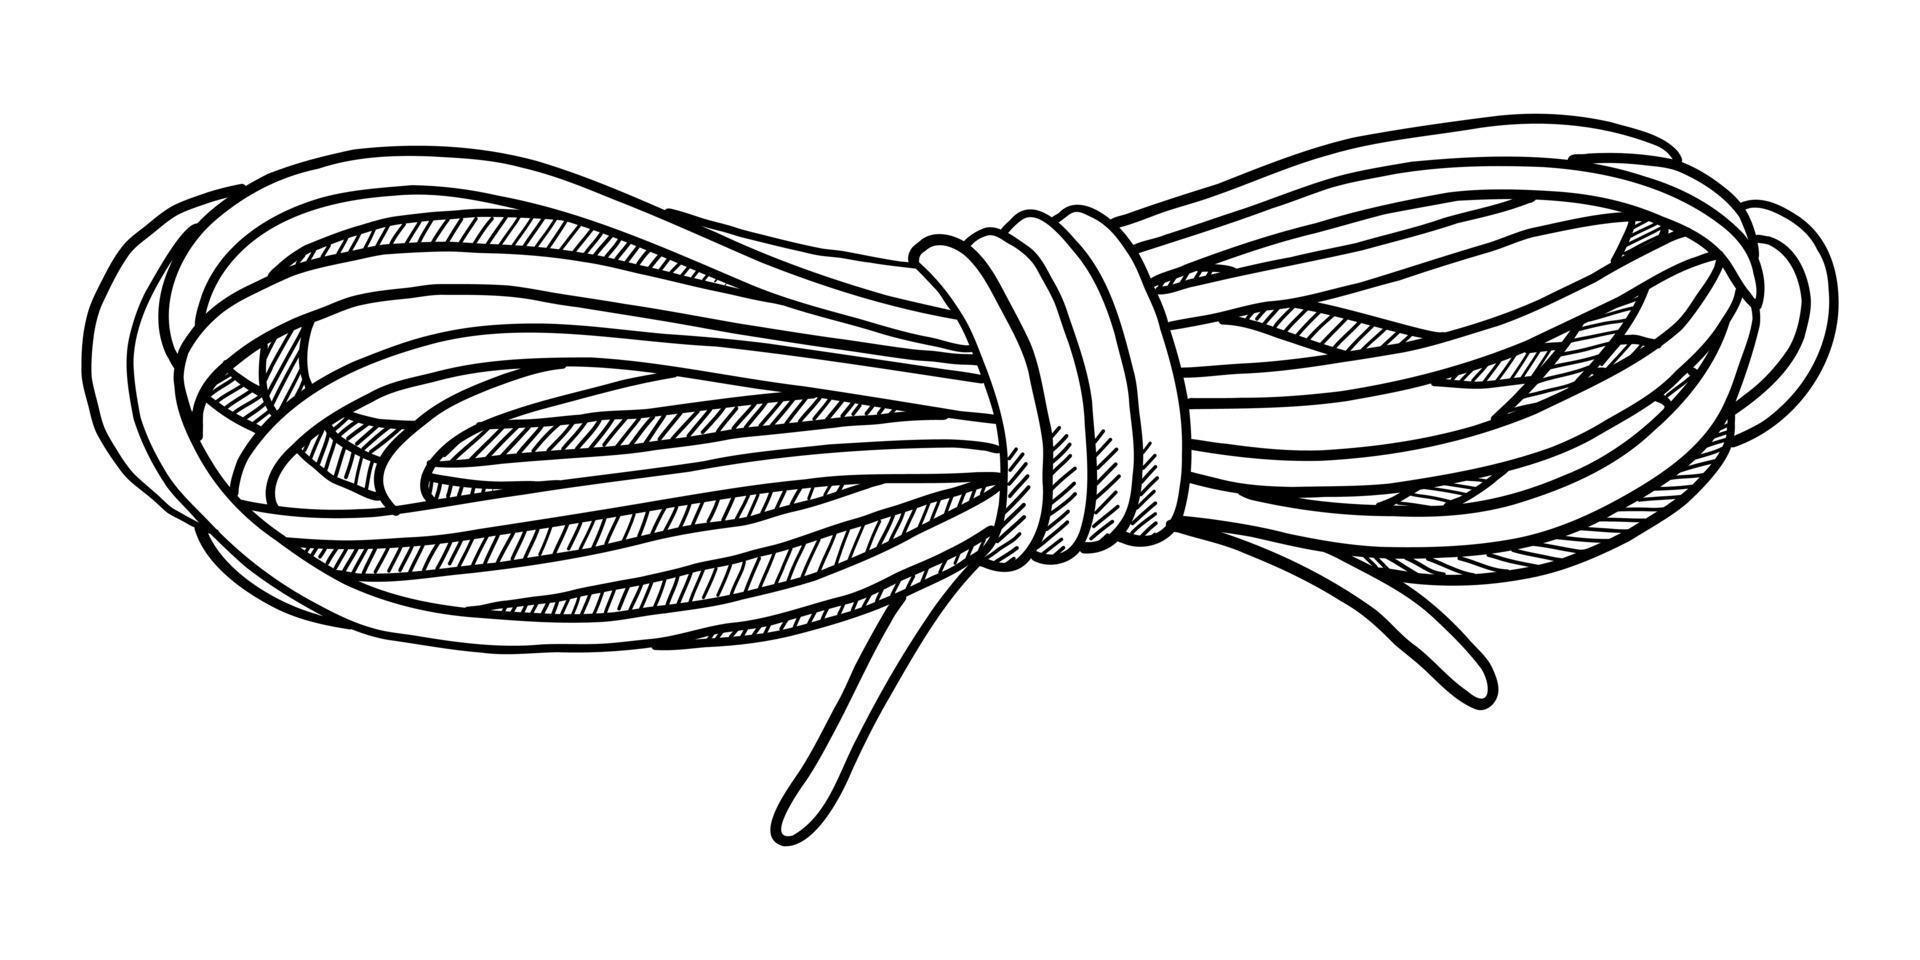 VECTOR ROPE ISOLATED ON A WHITE BACKGROUND. DOODLE DRAWING BY HAND